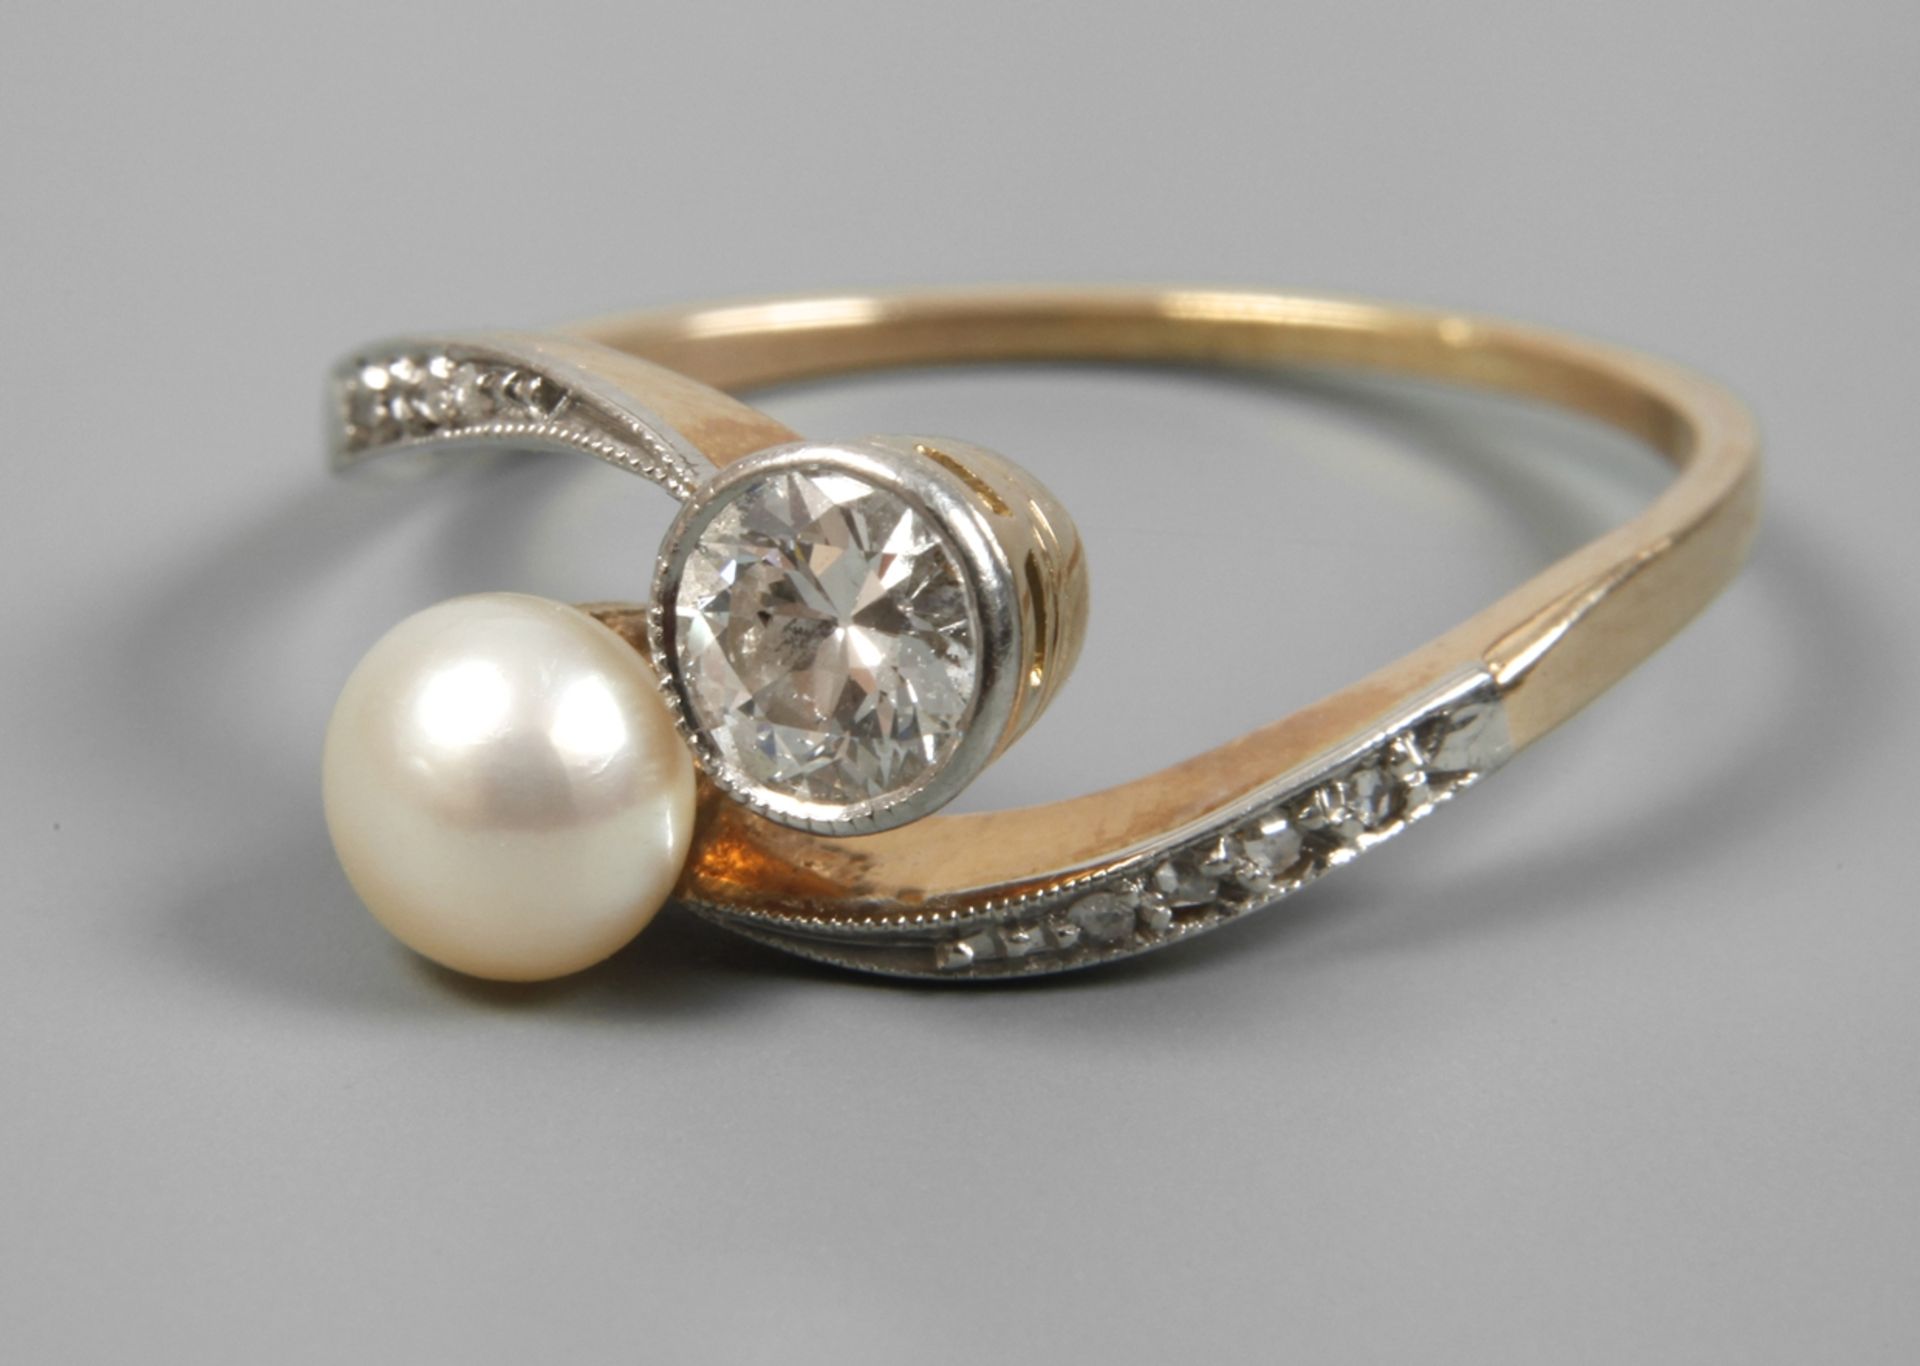 Lady's ring with diamond and pearl